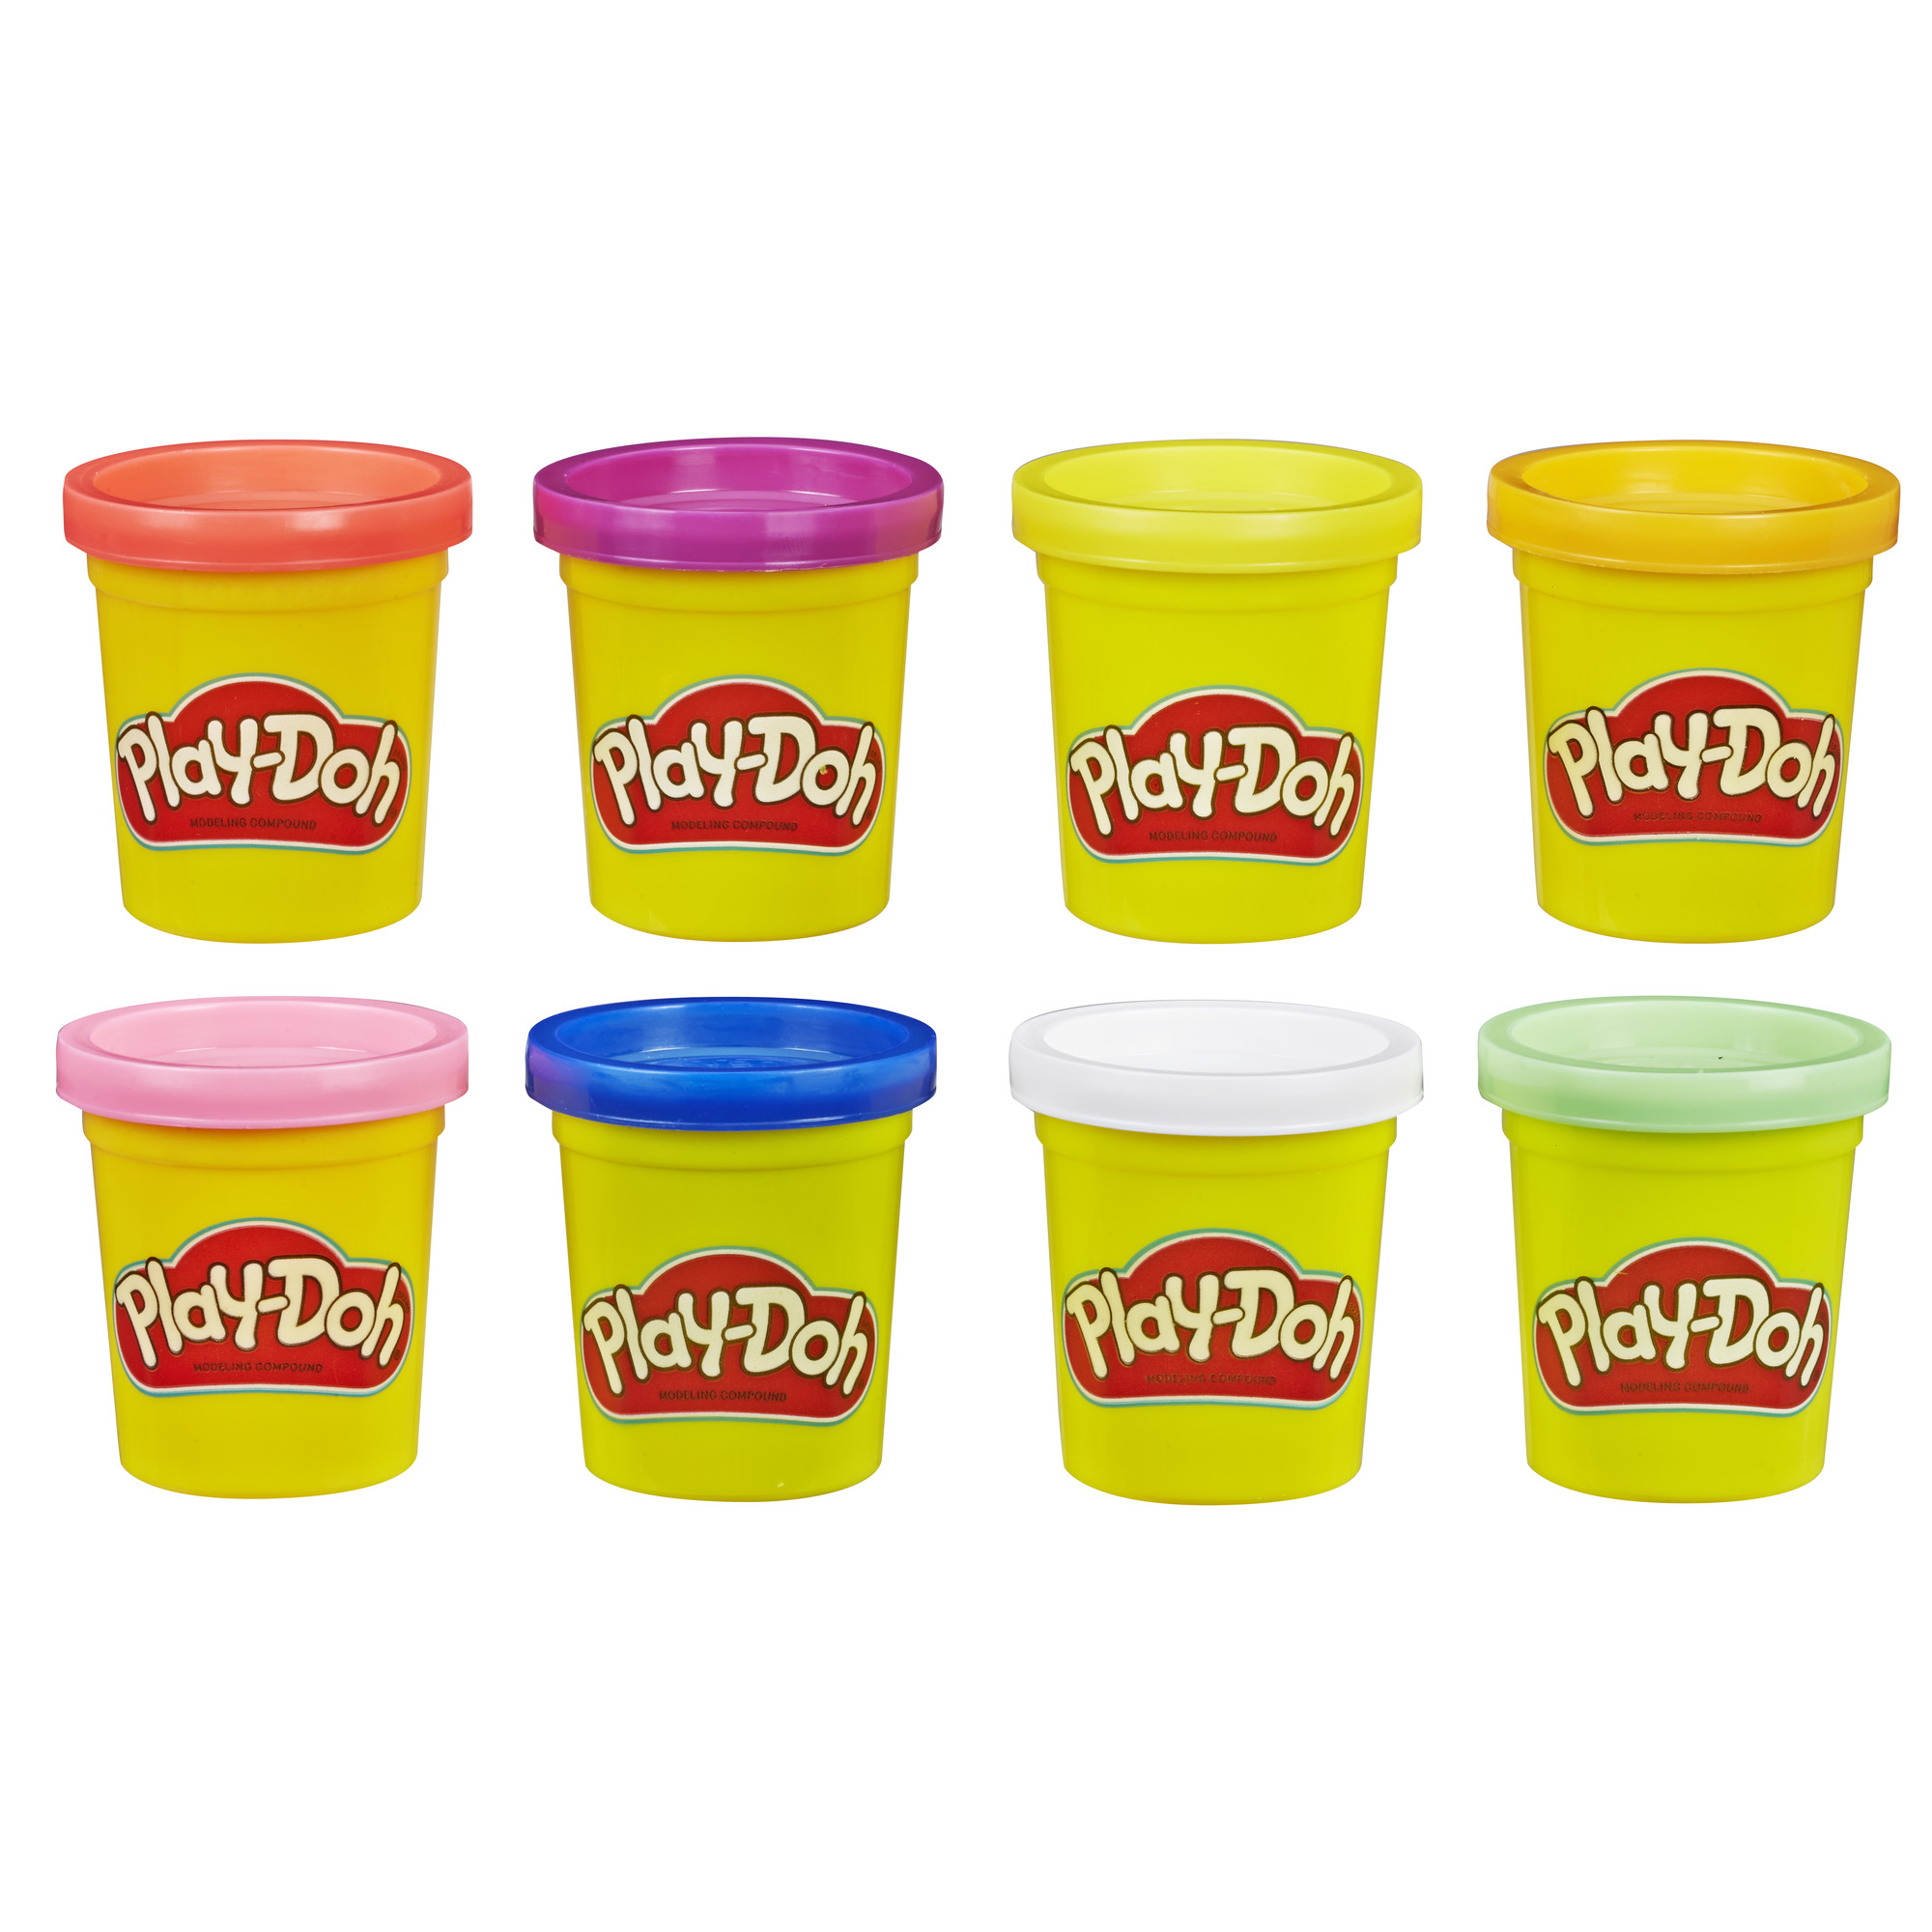 Play-Doh Rainbow Colors 8 Pack of 2-Ounce Cans, Back to School Supplies - image 4 of 7